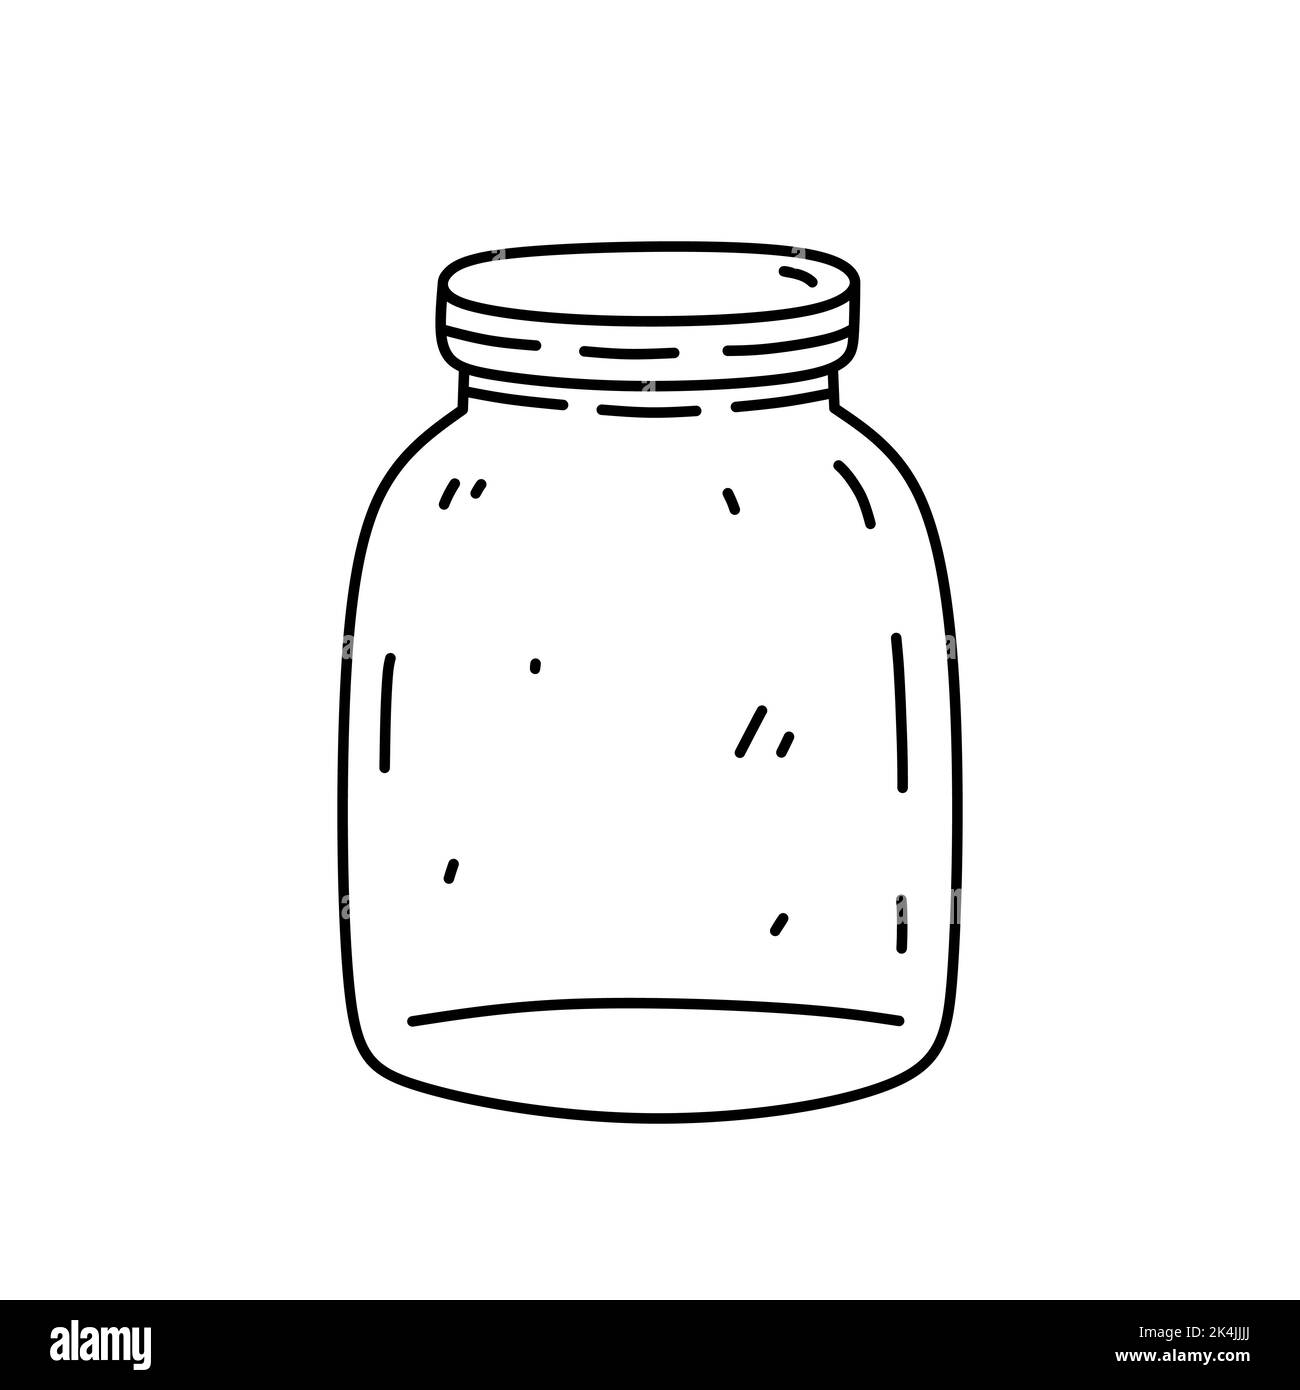 Glass jar isolated on white background. Vector hand-drawn illustration in doodle style. Perfect for decorations, logo, various designs. Stock Vector